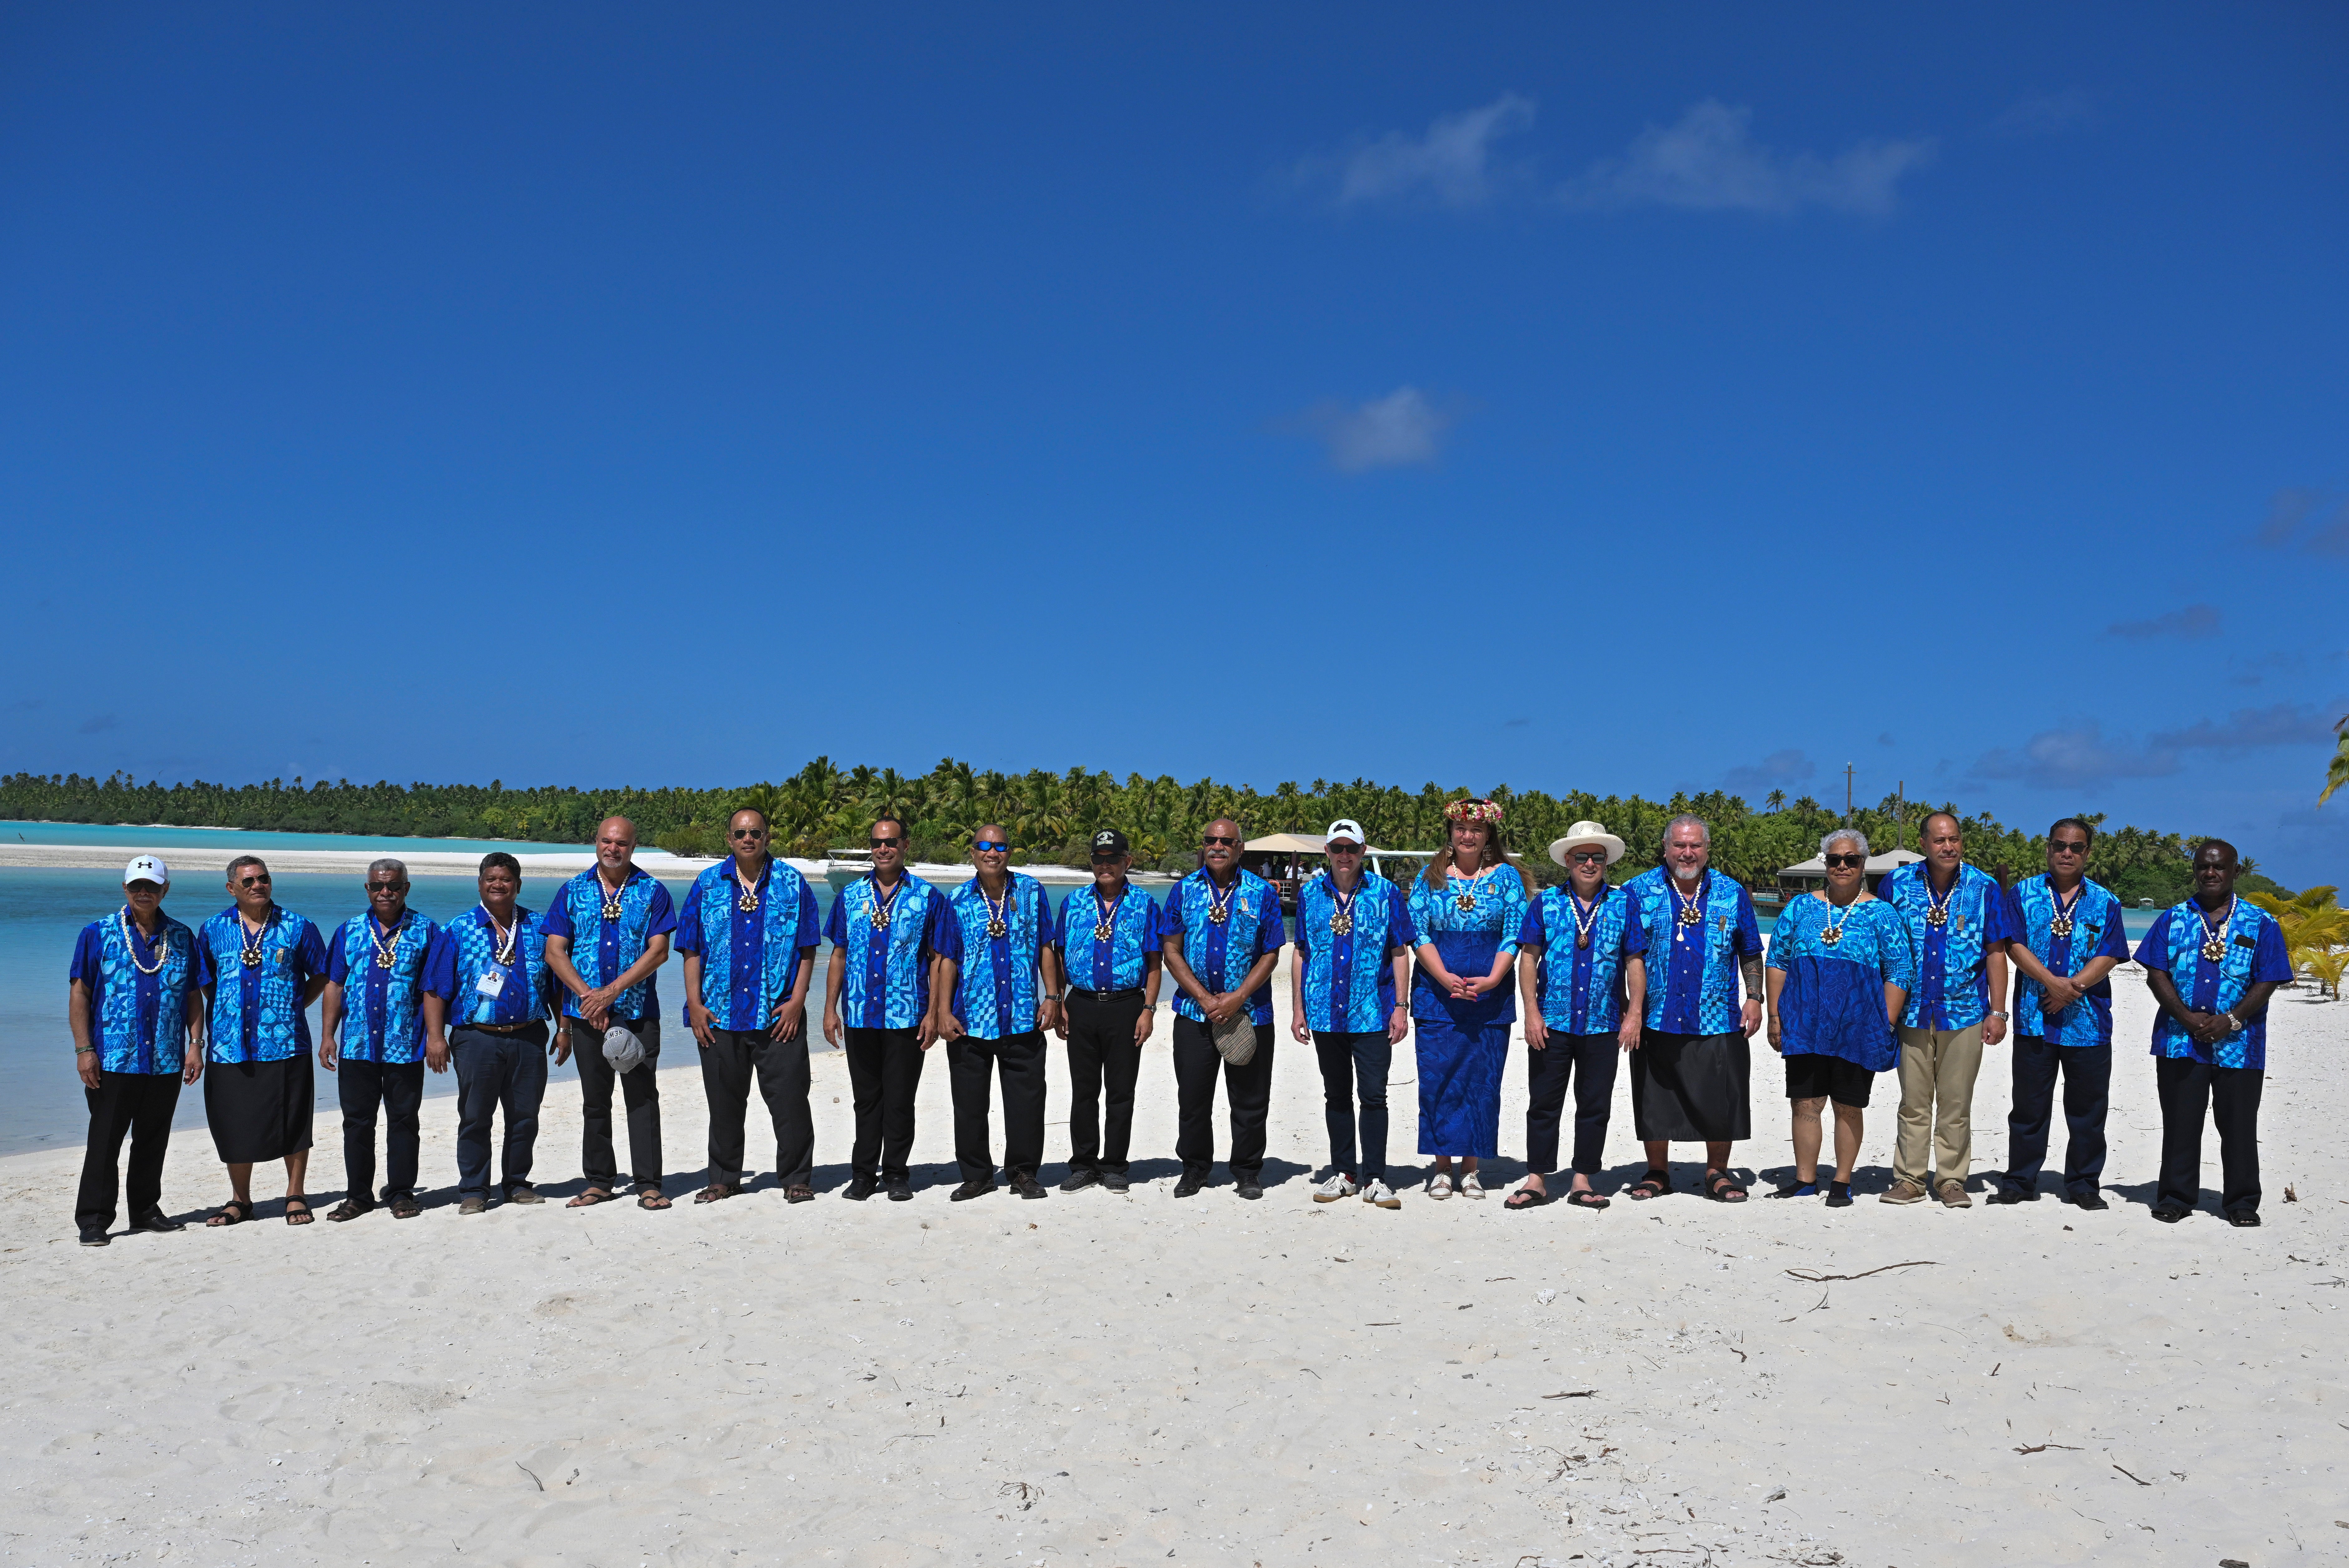 Pacific leaders pose for a group photograph on One Foot Island after attending the Leaders' Retreat